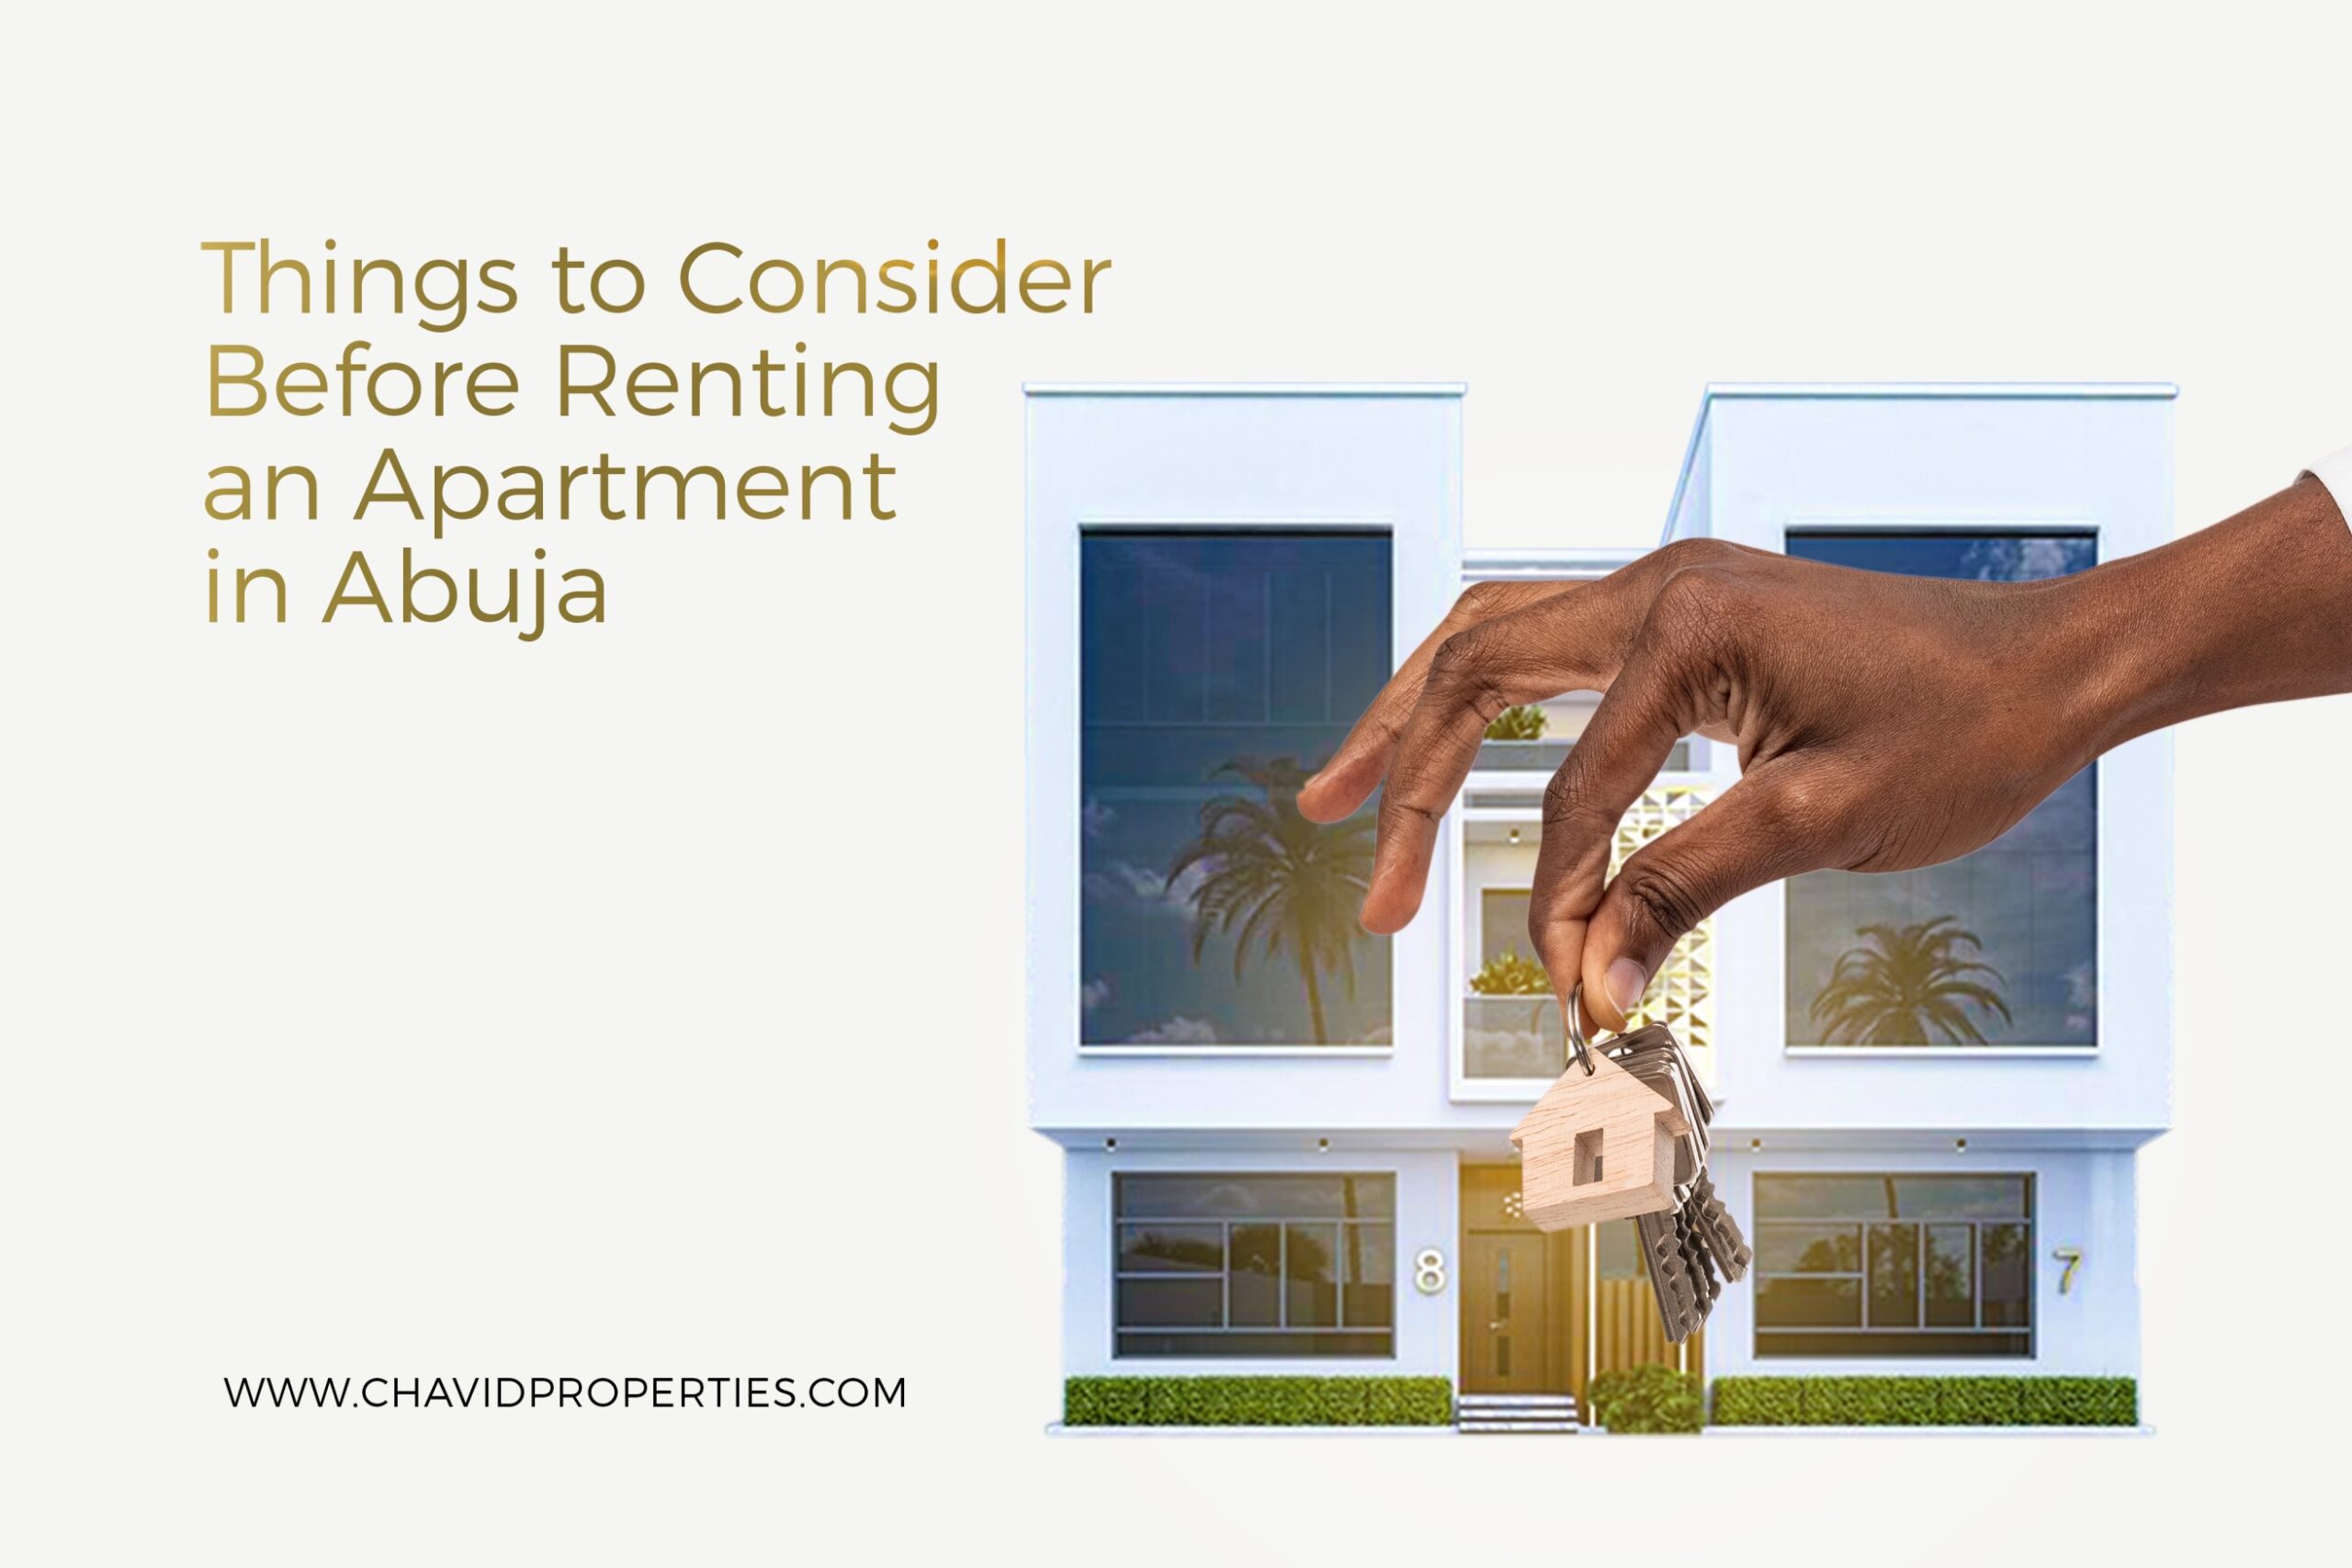 Renting an apartment in Abuja